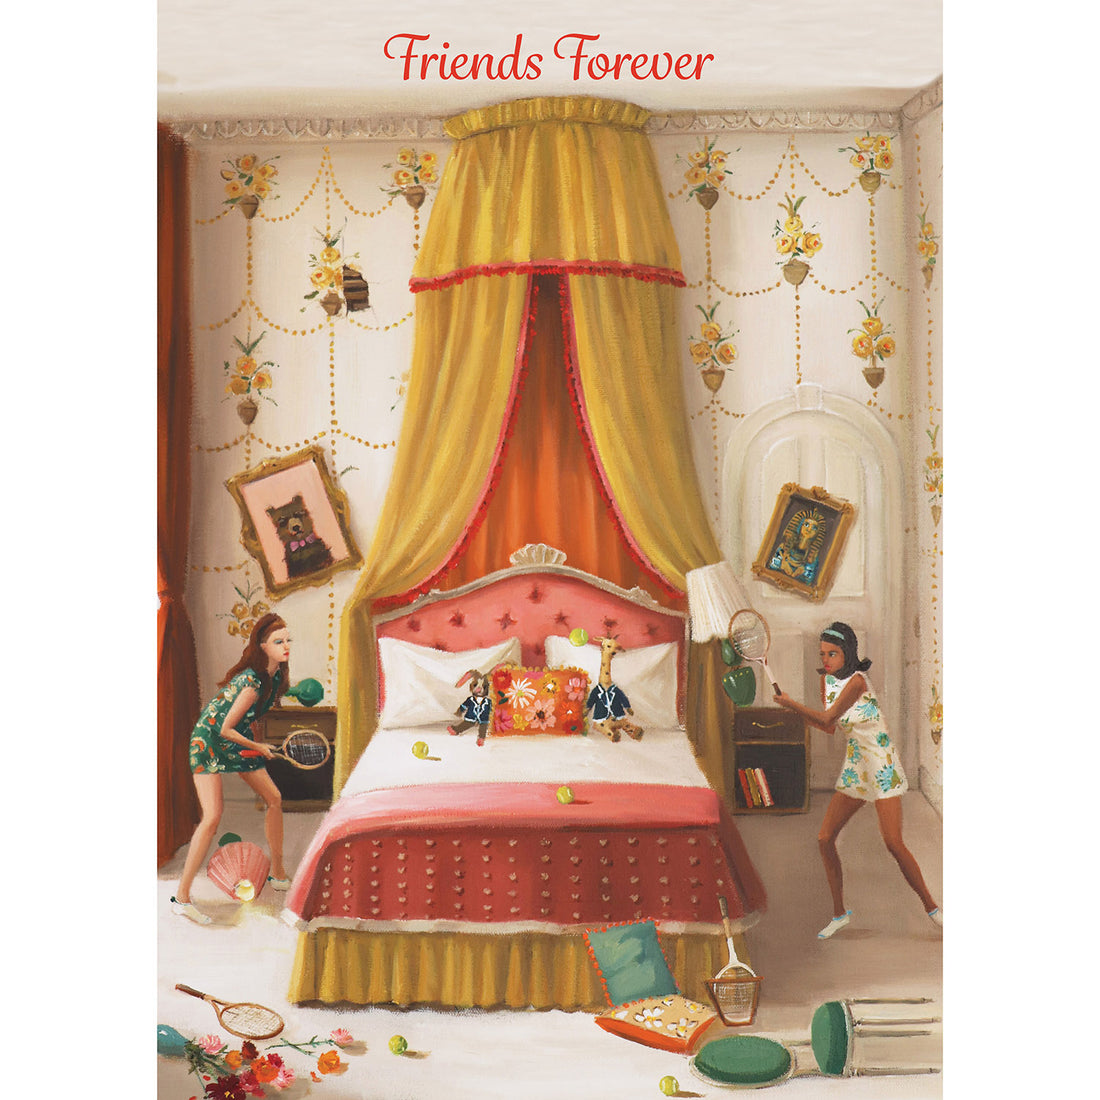 A painterly illustration of two girls playing with tennis rackets and balls on either side of a bed in one girl&